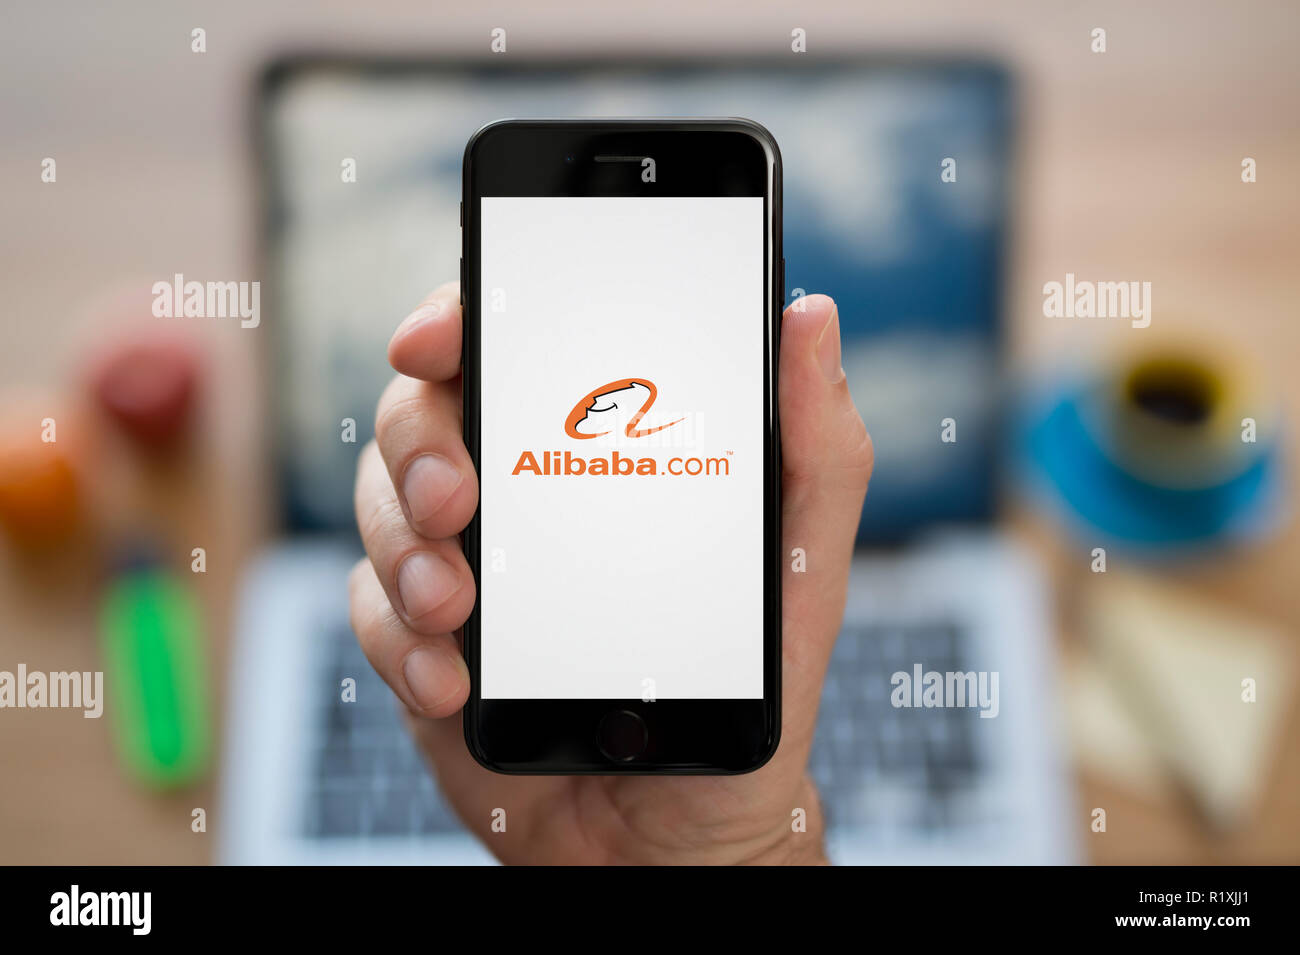 A man looks at his iPhone which displays the Alibaba logo, while sat at his computer desk (Editorial use only). Stock Photo